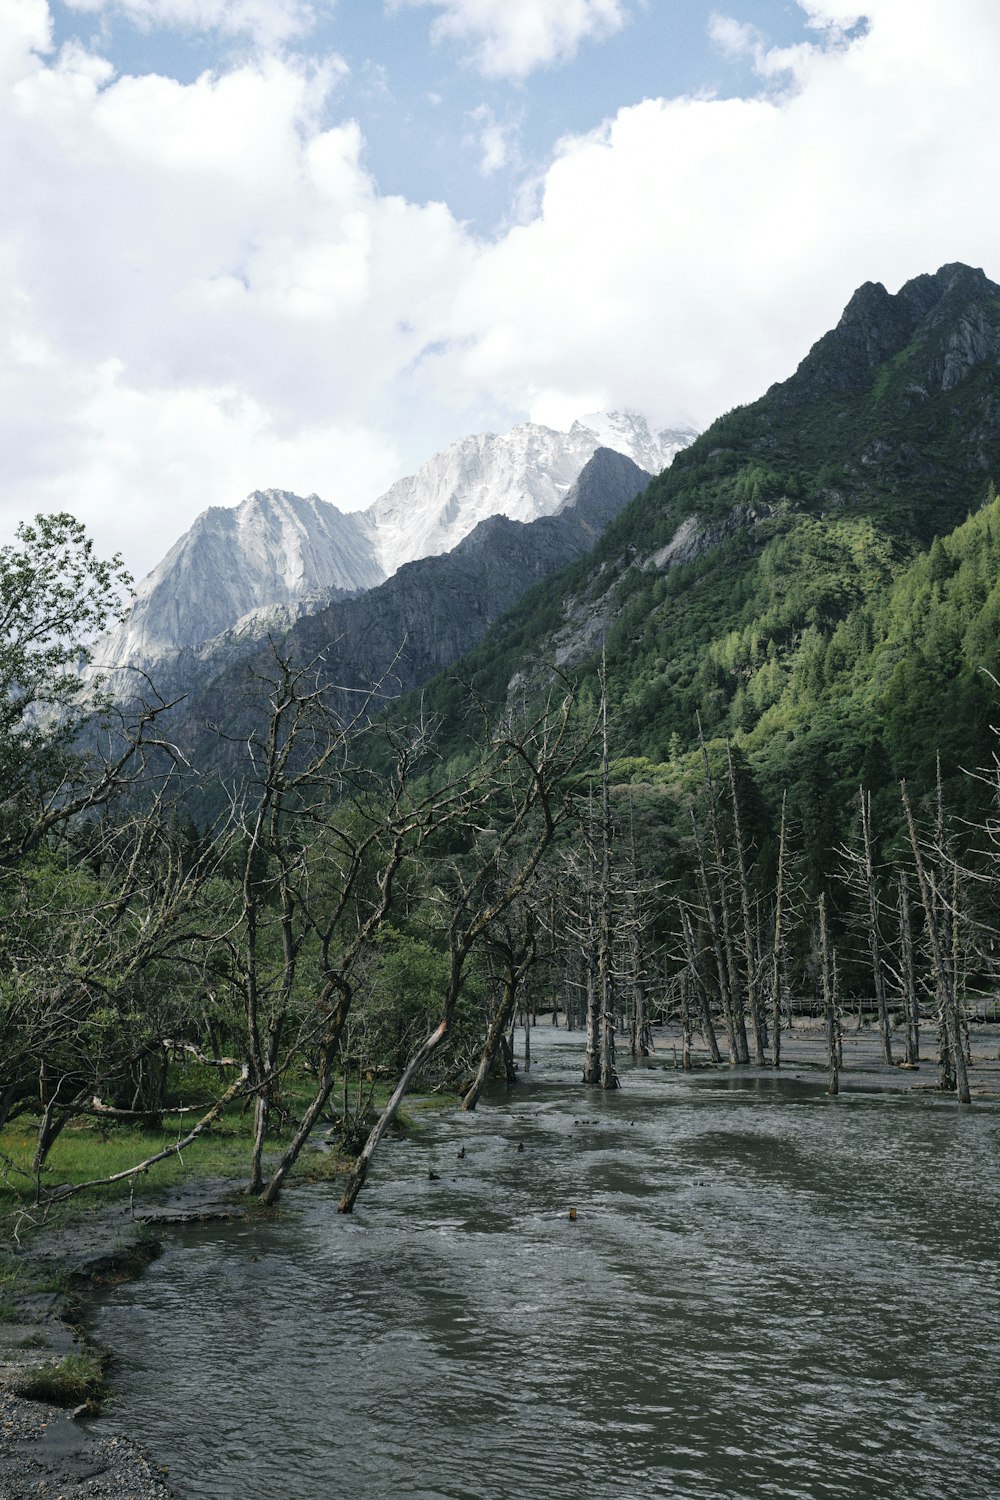 a river running through a forest with mountains in the background